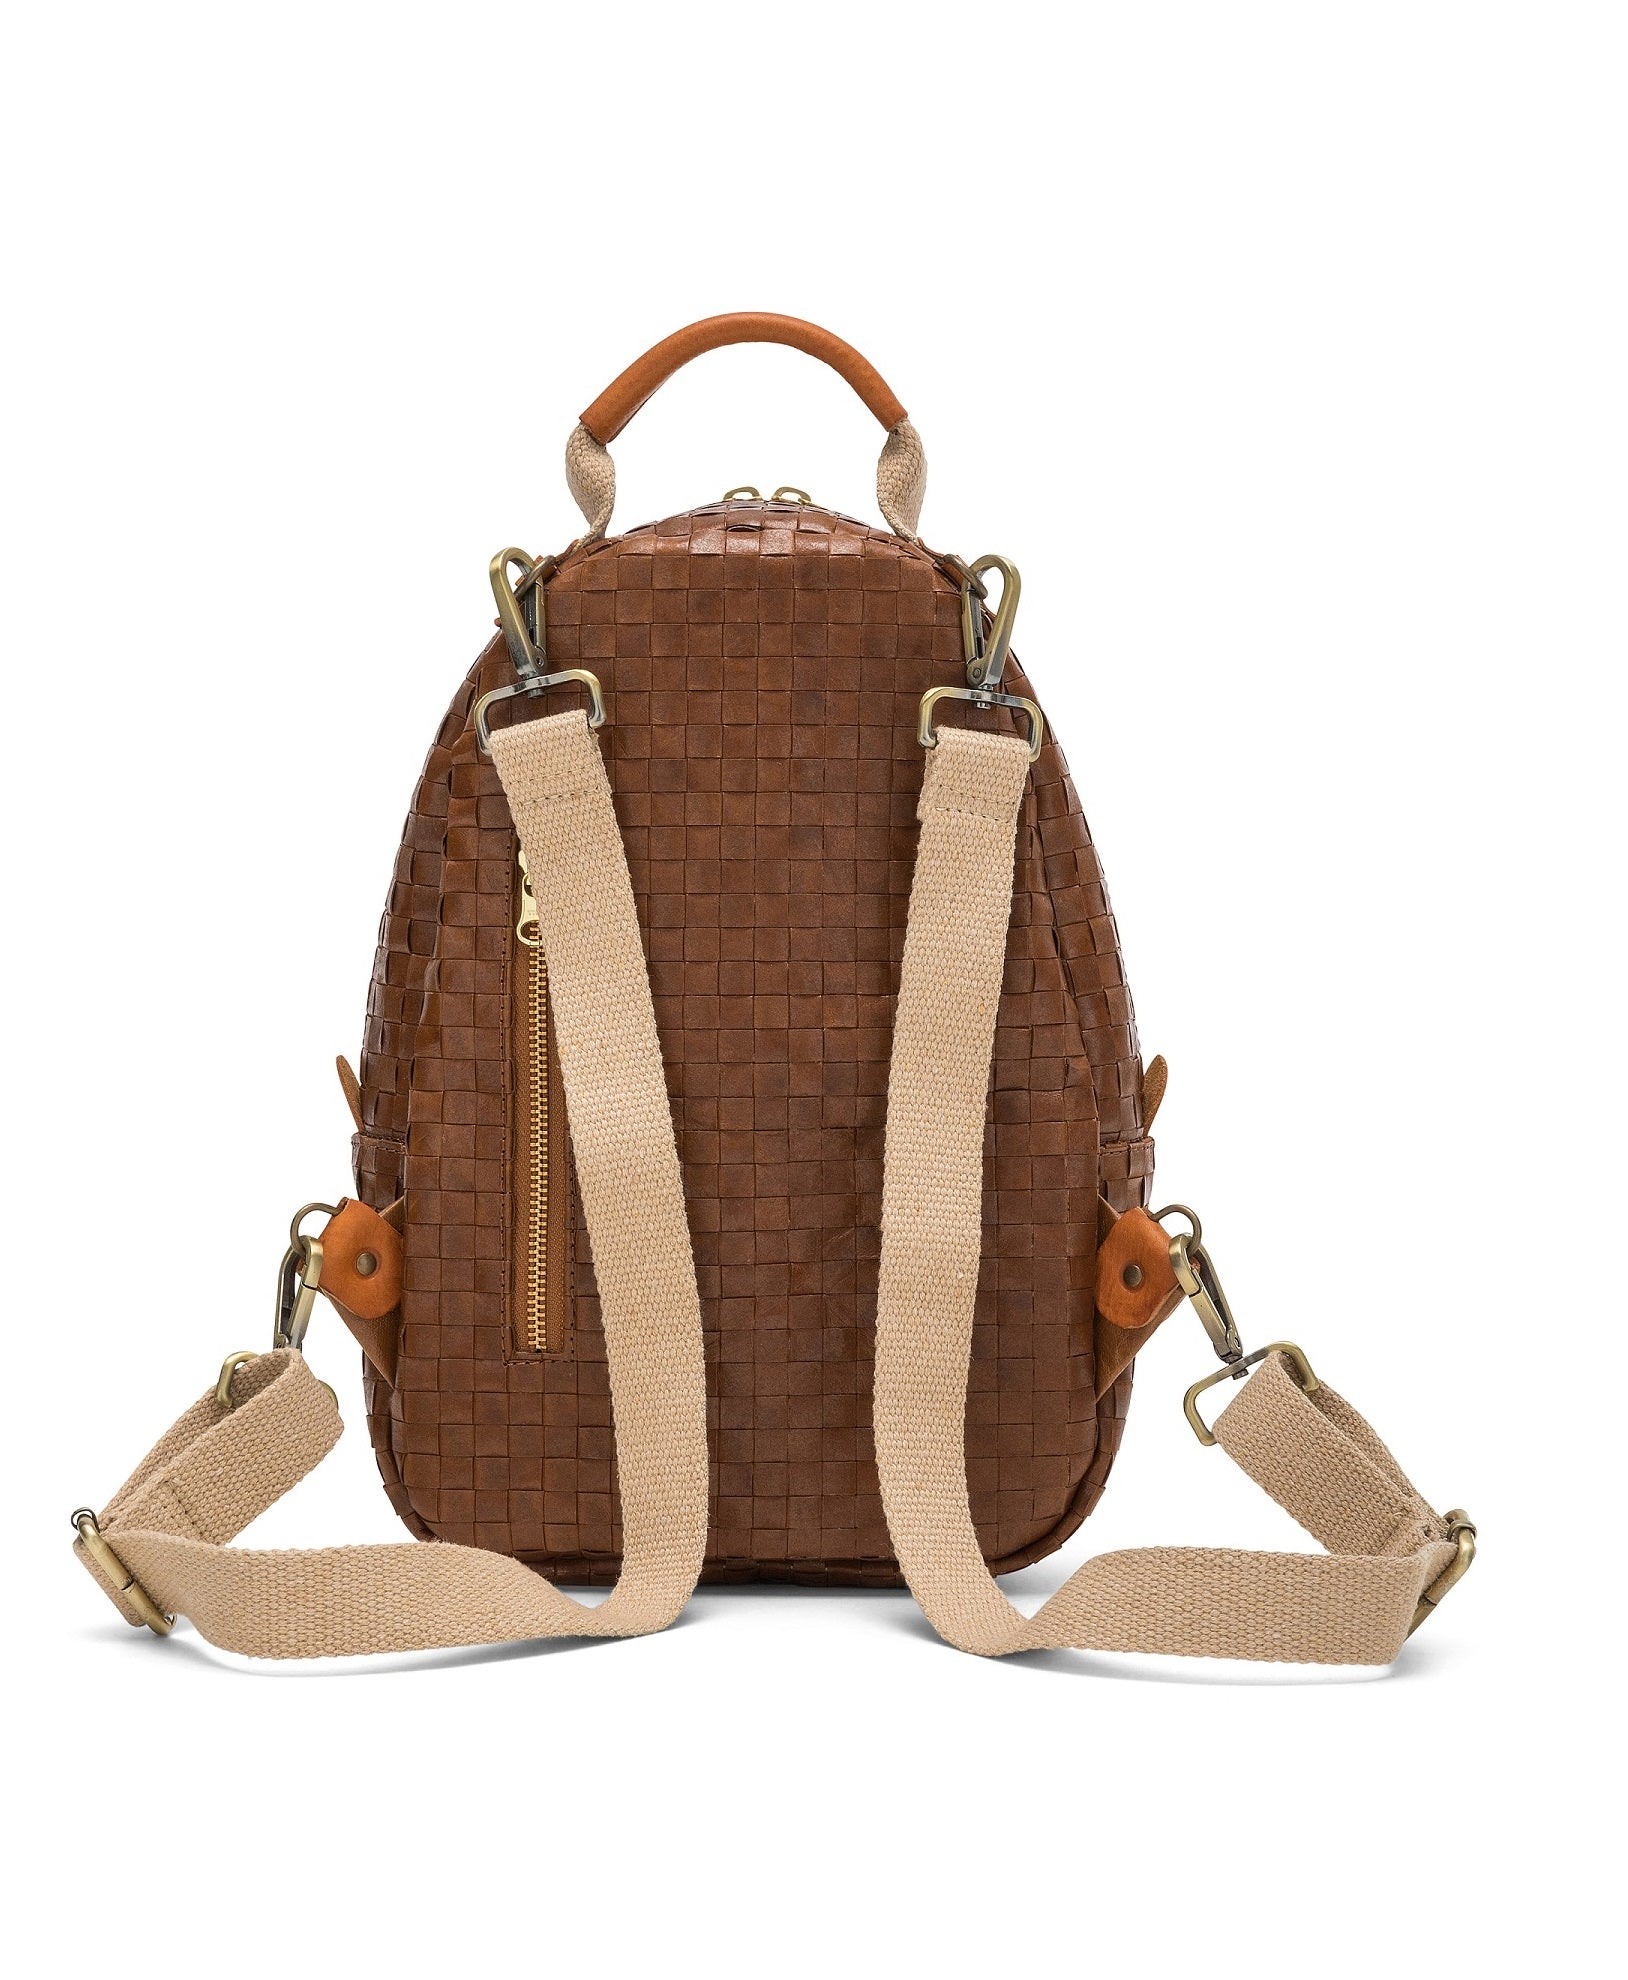 A washable paper backpack is shown from the back angle. It features a top handle, two canvas shoulder straps, and a gold zip pocket at rear. It is brown in colour.